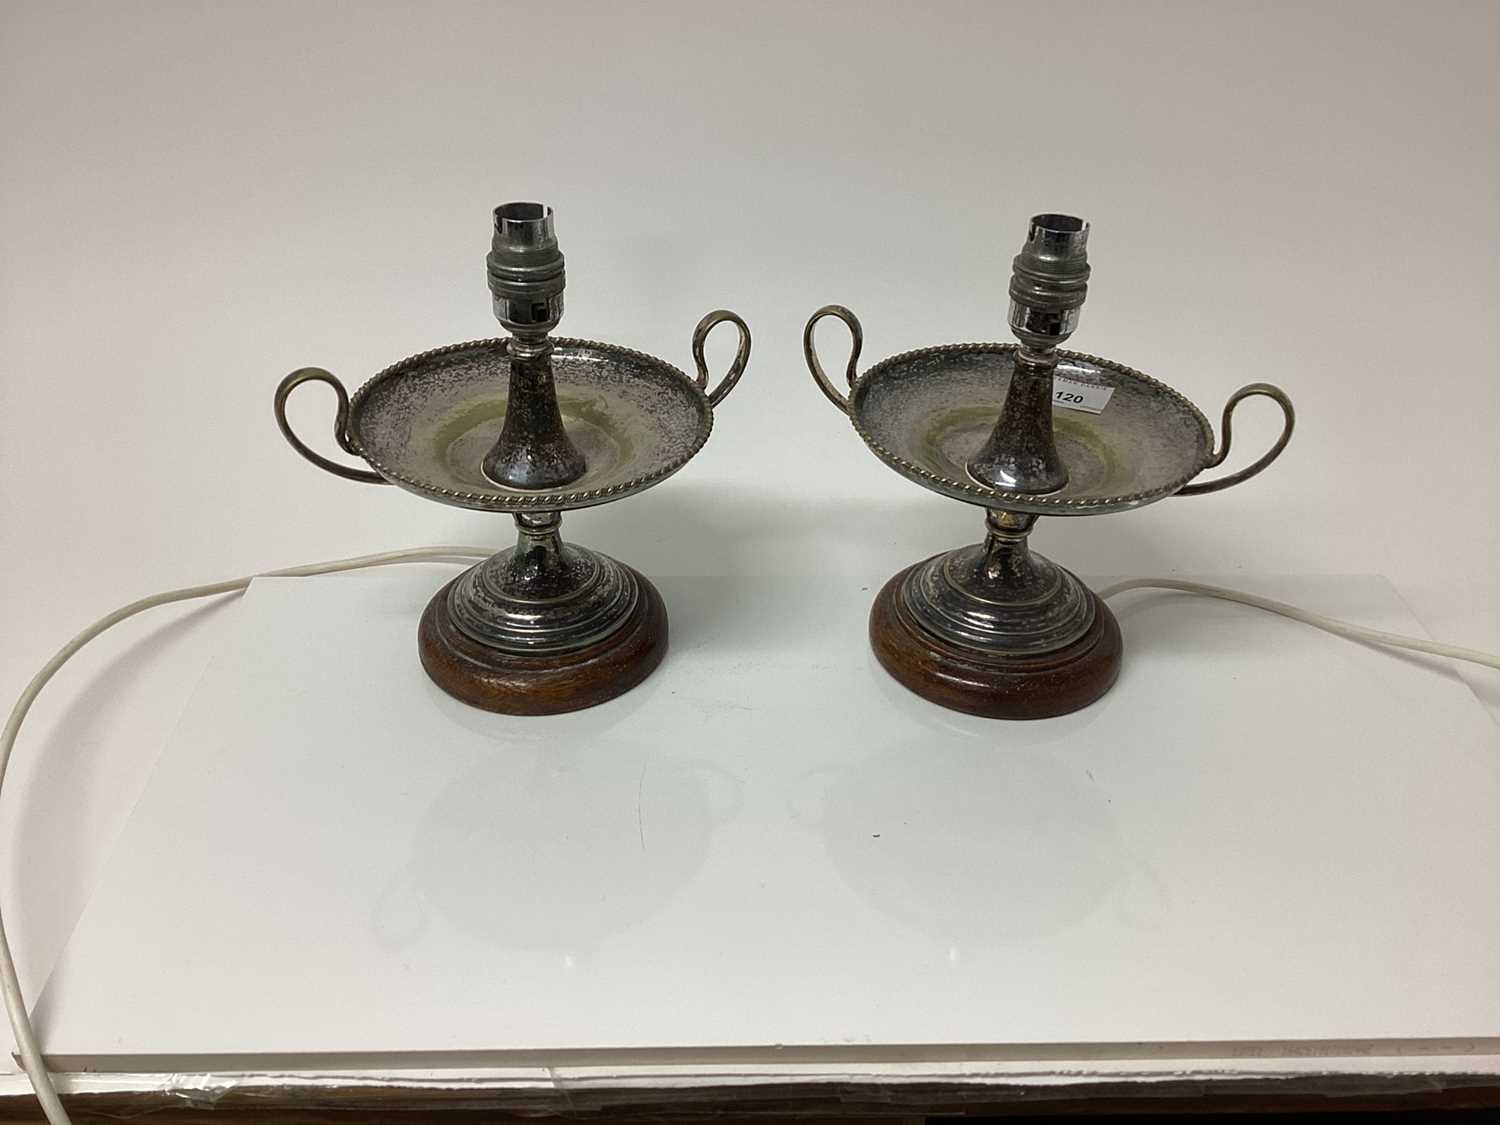 Lot 120 - Pair of silver plated table lamps with twin handles and gadrooned borders, on wooden bases